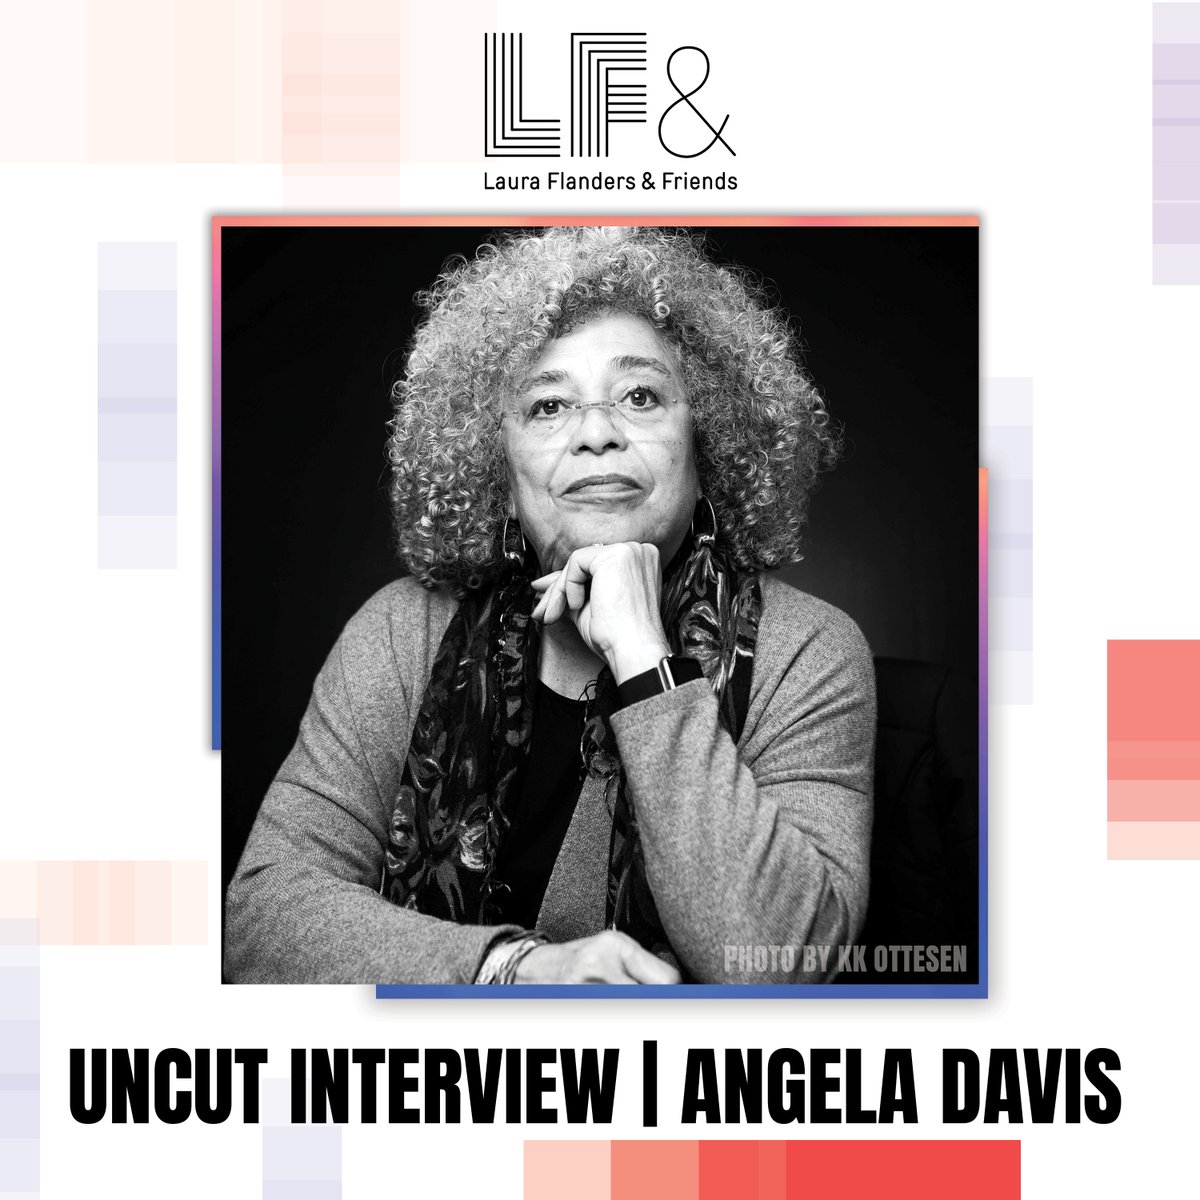 Last month we asked you to share your questions for activist #AngelaDavis. Not every question made it to public TV, but you can unlock early access to our uncut conversation by becoming a #Patreon donor. Help keep this content free and available to all: bit.ly/4duqymS